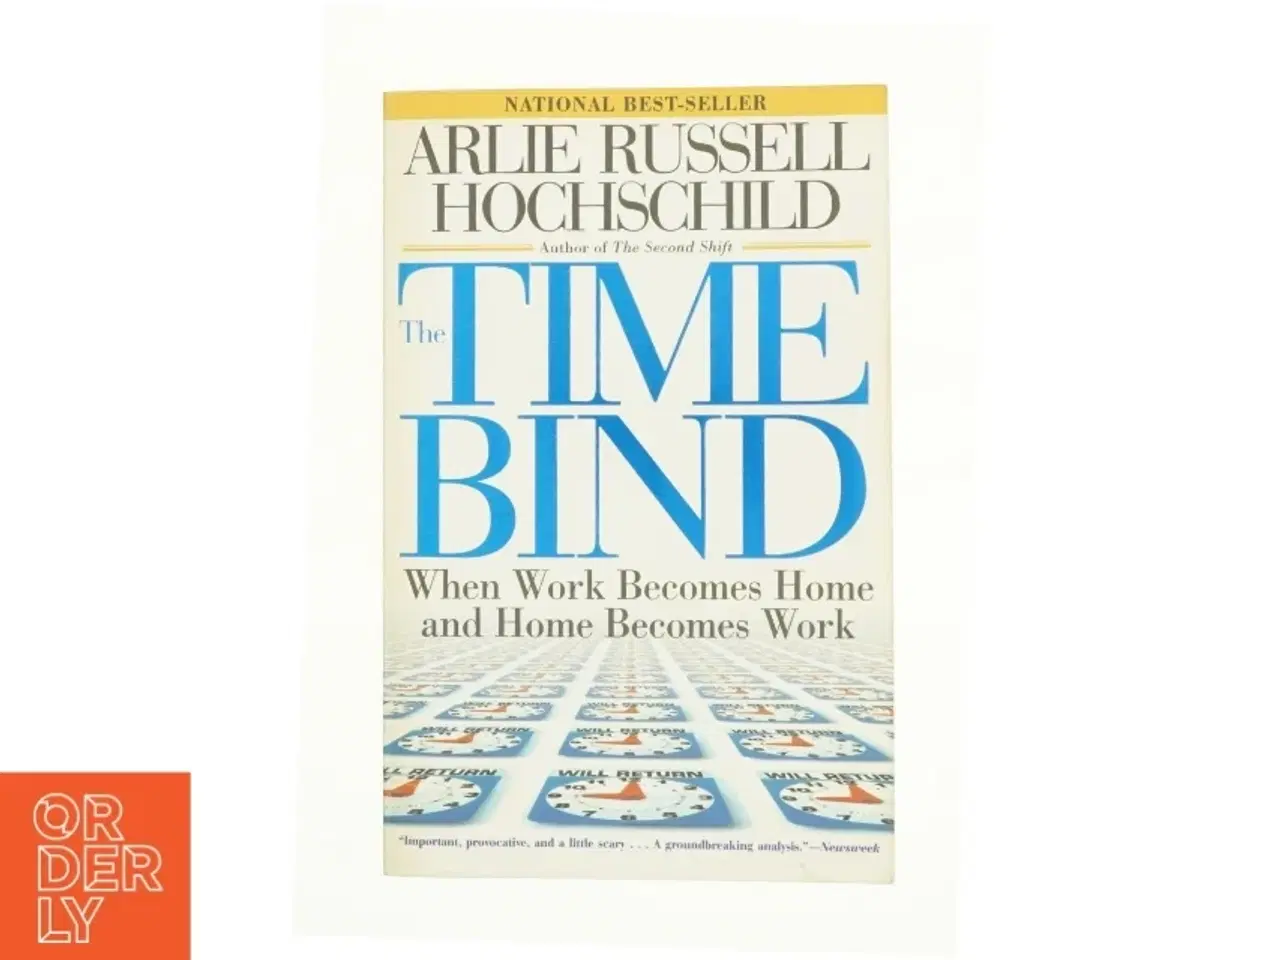 Billede 1 - The Time Bind : When Work Becomes Home and Home Becomes Work by Arlie Russell Hochschild af Hochschild, Arlie Russell / Ehrenreich, Barbara / Kay, Sha